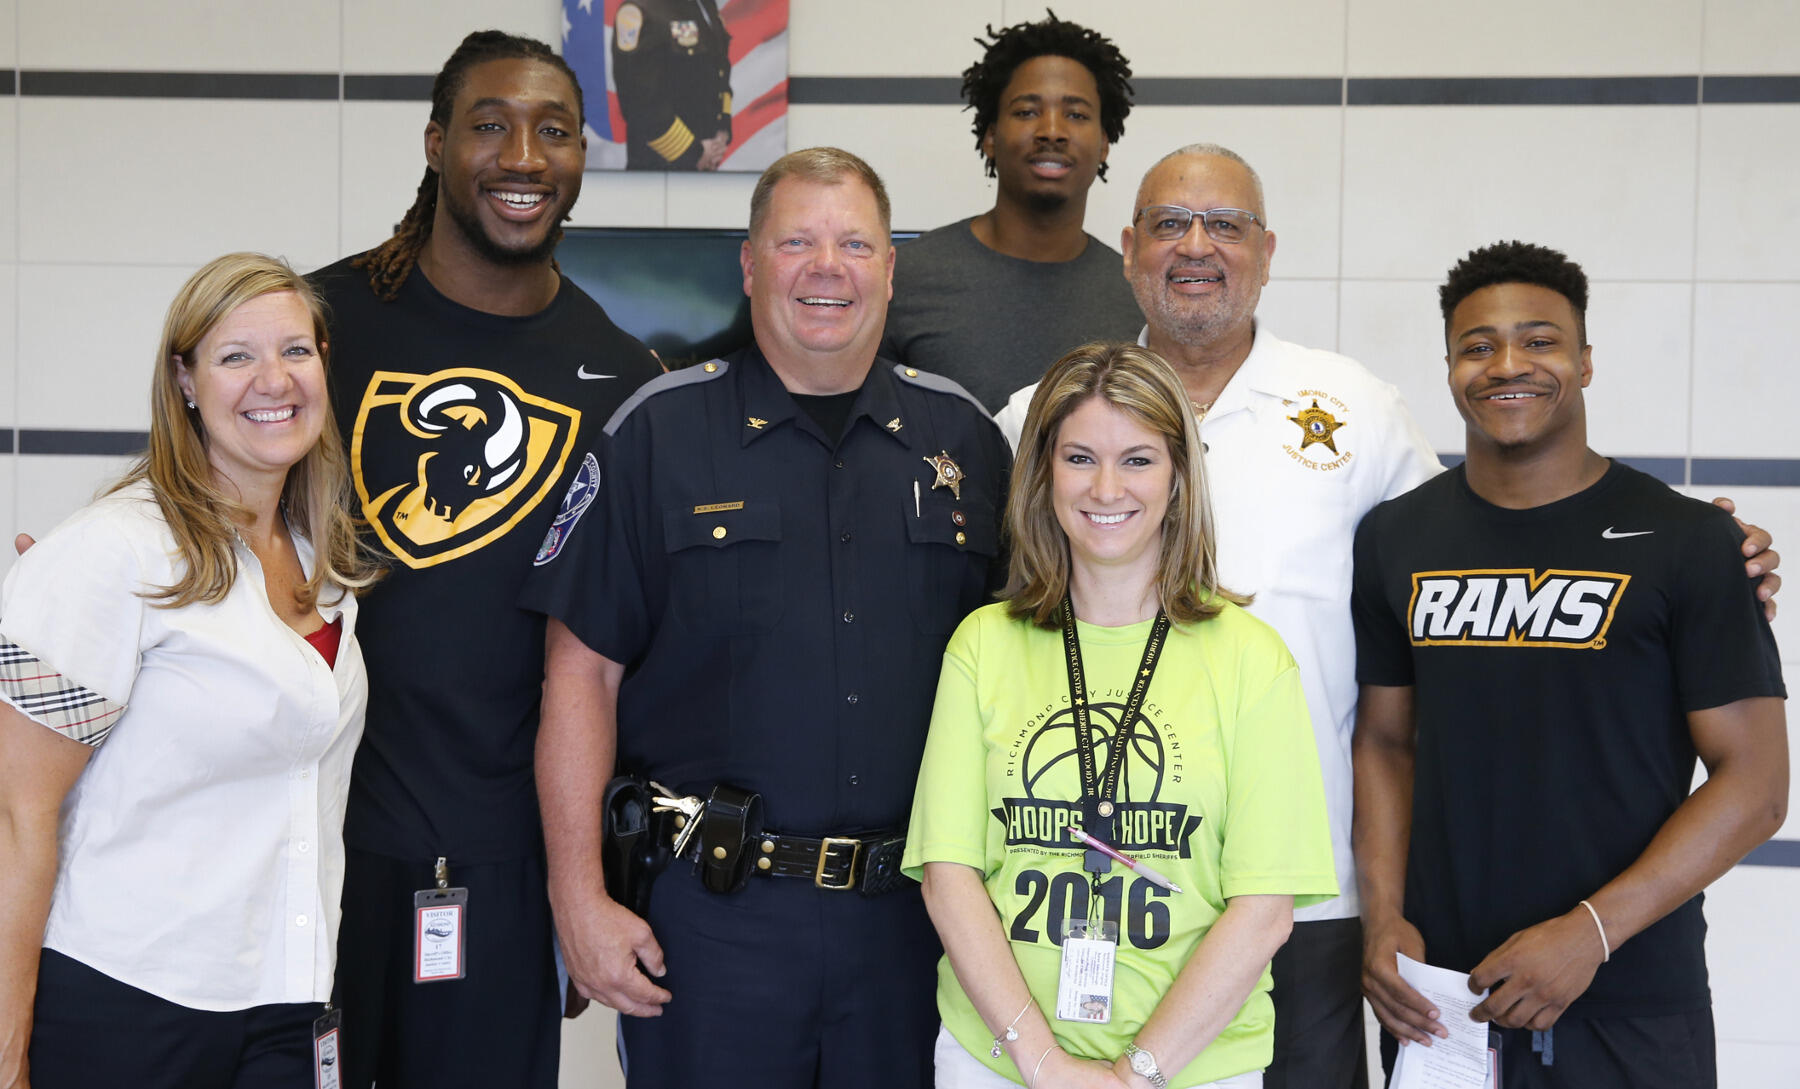 From left to right: Robyn McDougle, Mo Alie-Cox, Chesterfield Sheriff Karl S. Leonard, Ed Davis, Sarah Scarbrough, Richmond Sheriff C.T. Woody Jr. and Torey Burston.